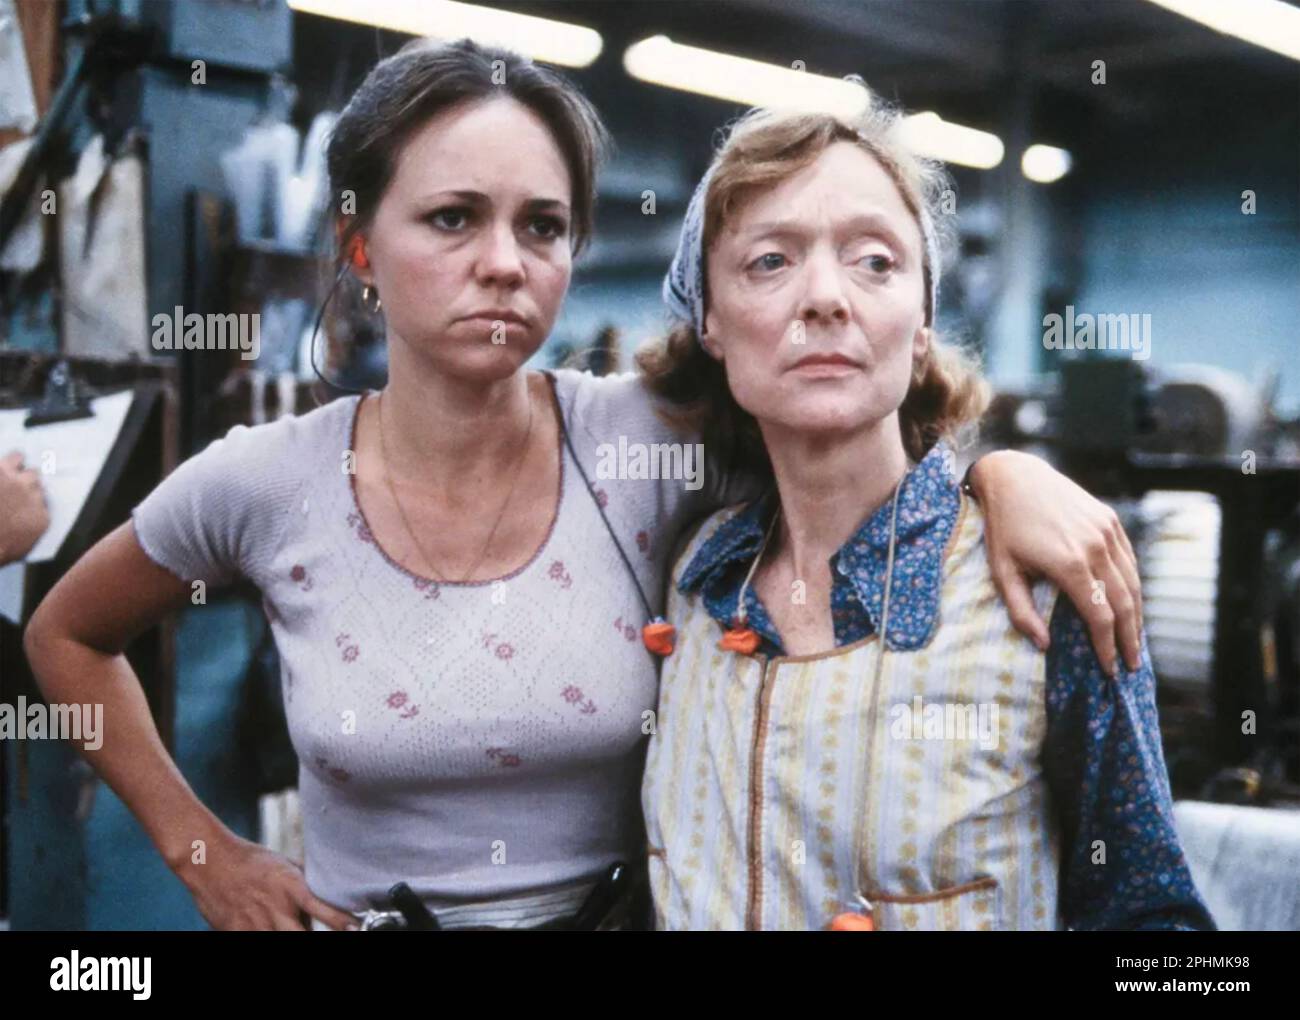 NORMA NRAE 1979 20th Century Fox film with Sally Field at left and Barbara Baxley Stock Photo